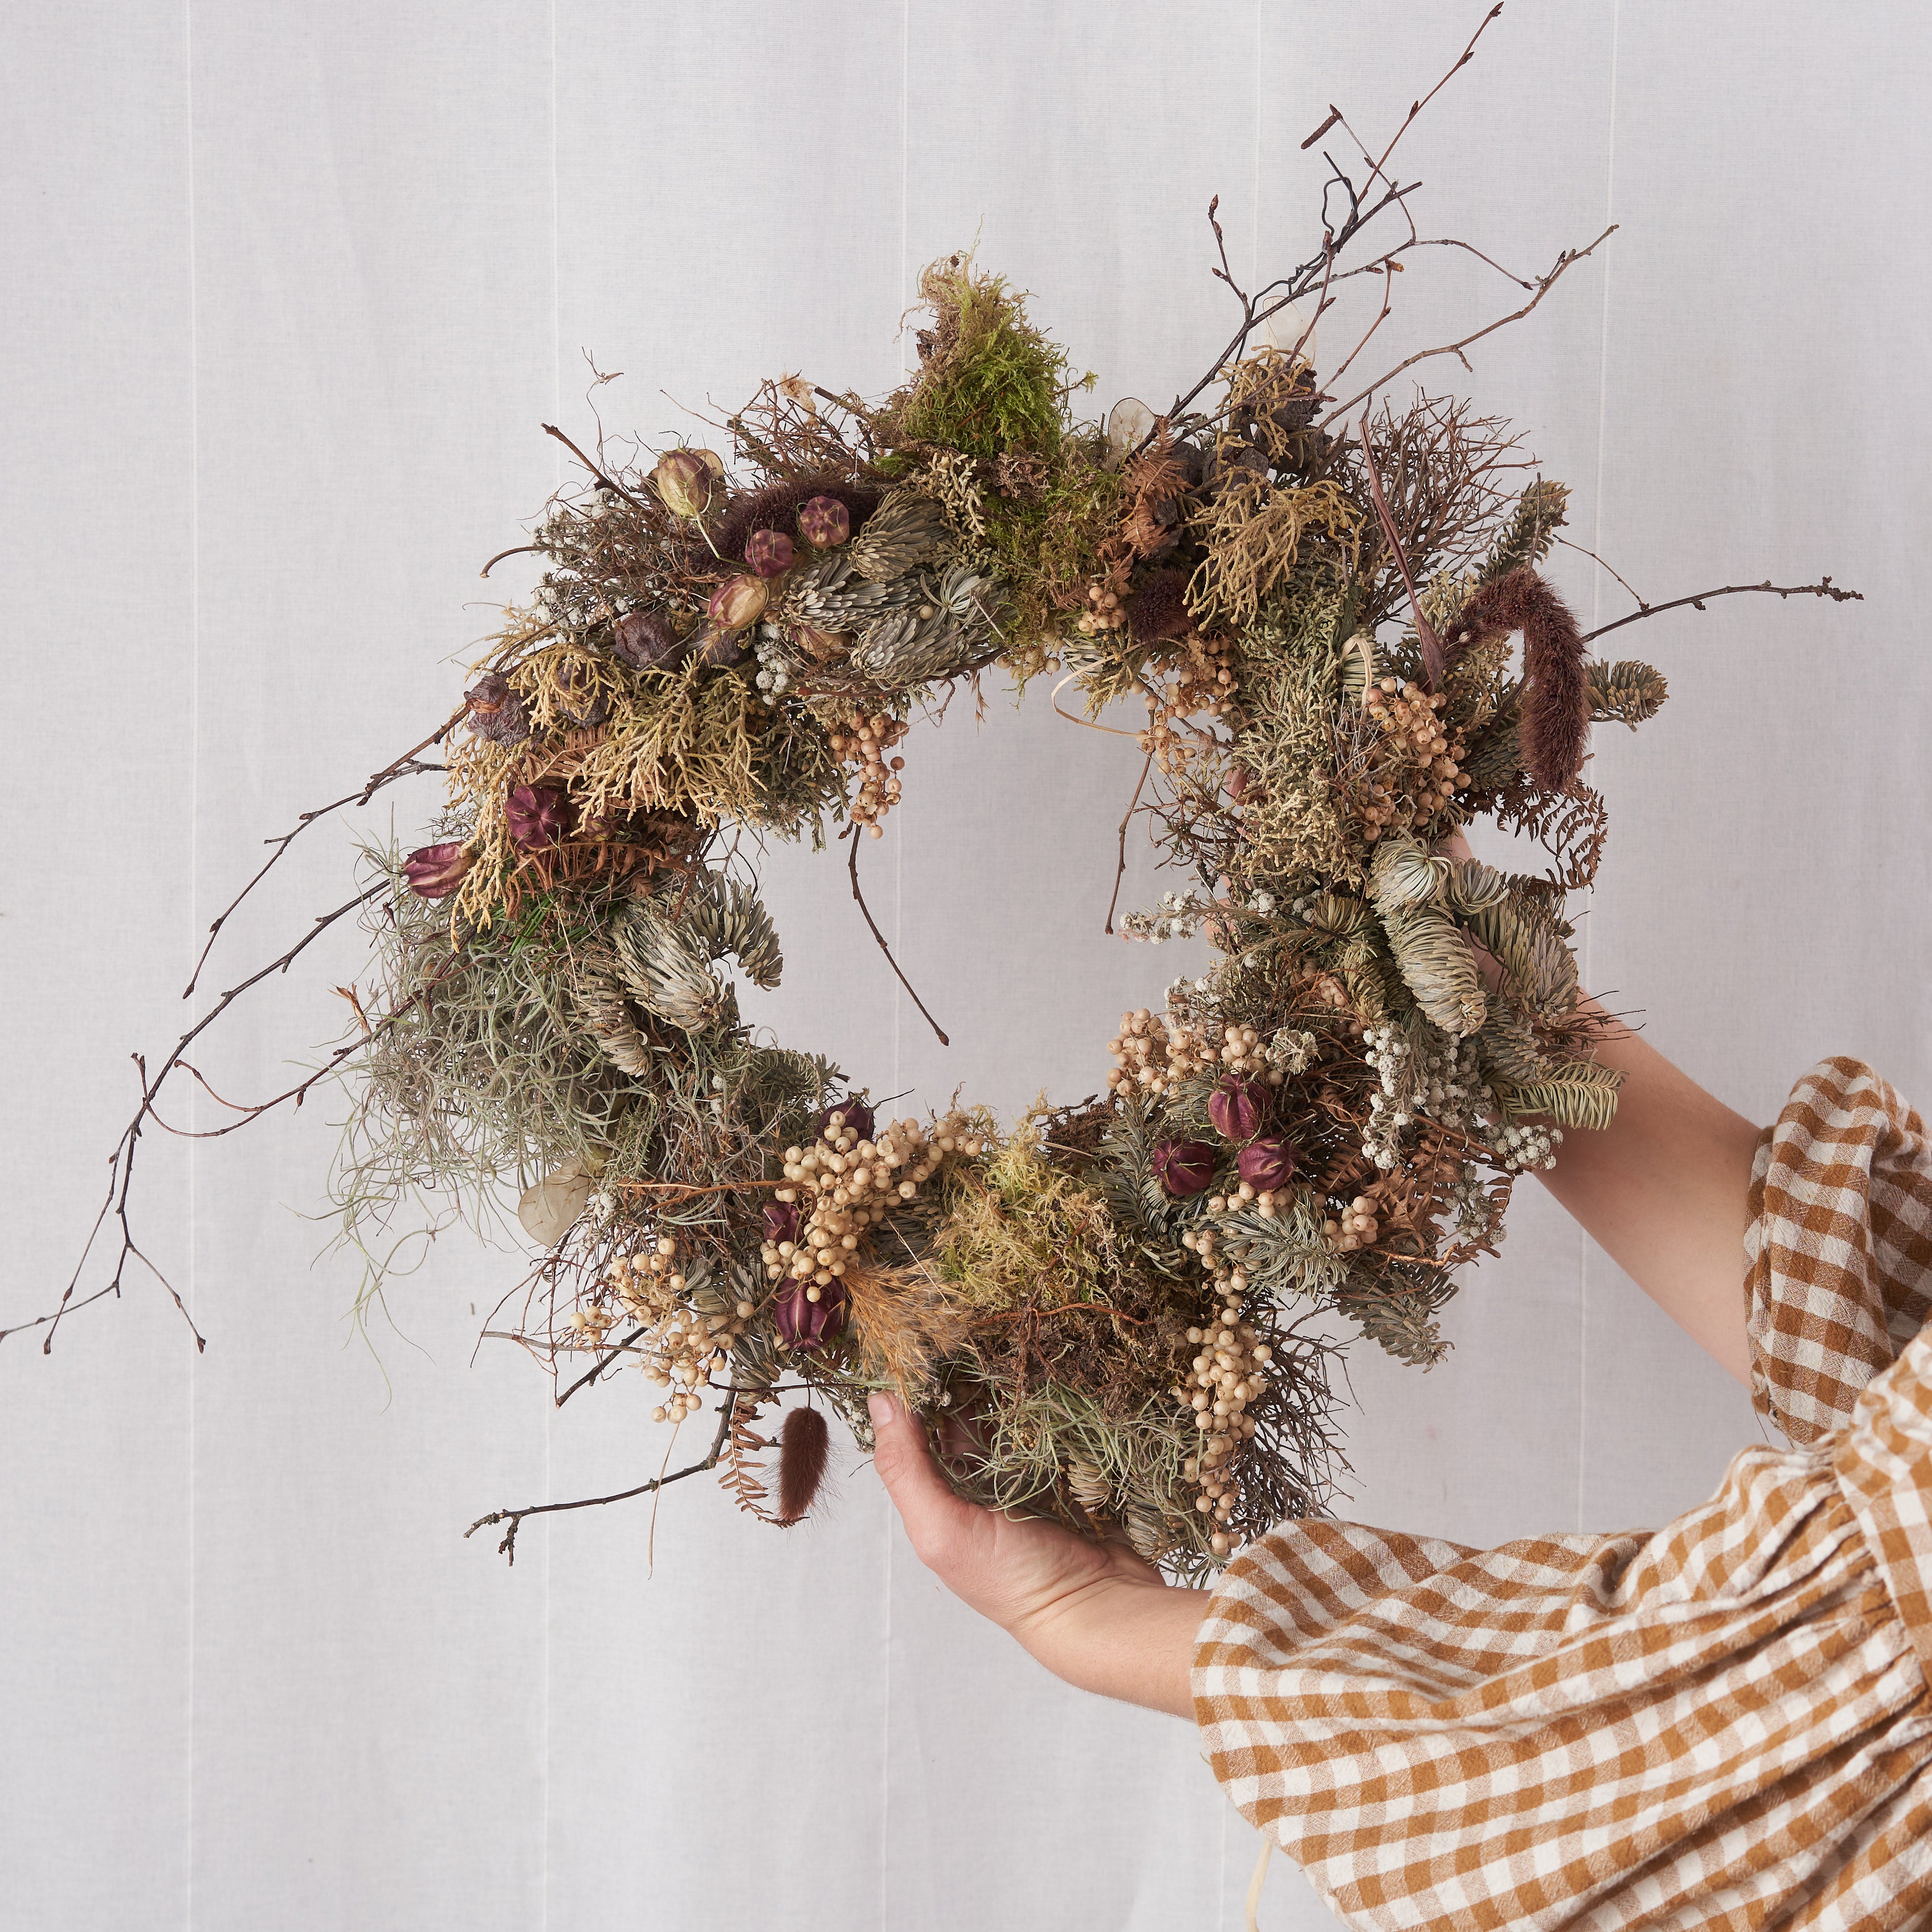 Do it yourself everlasting dried christmas wreath making kit by Botanique Workshop London